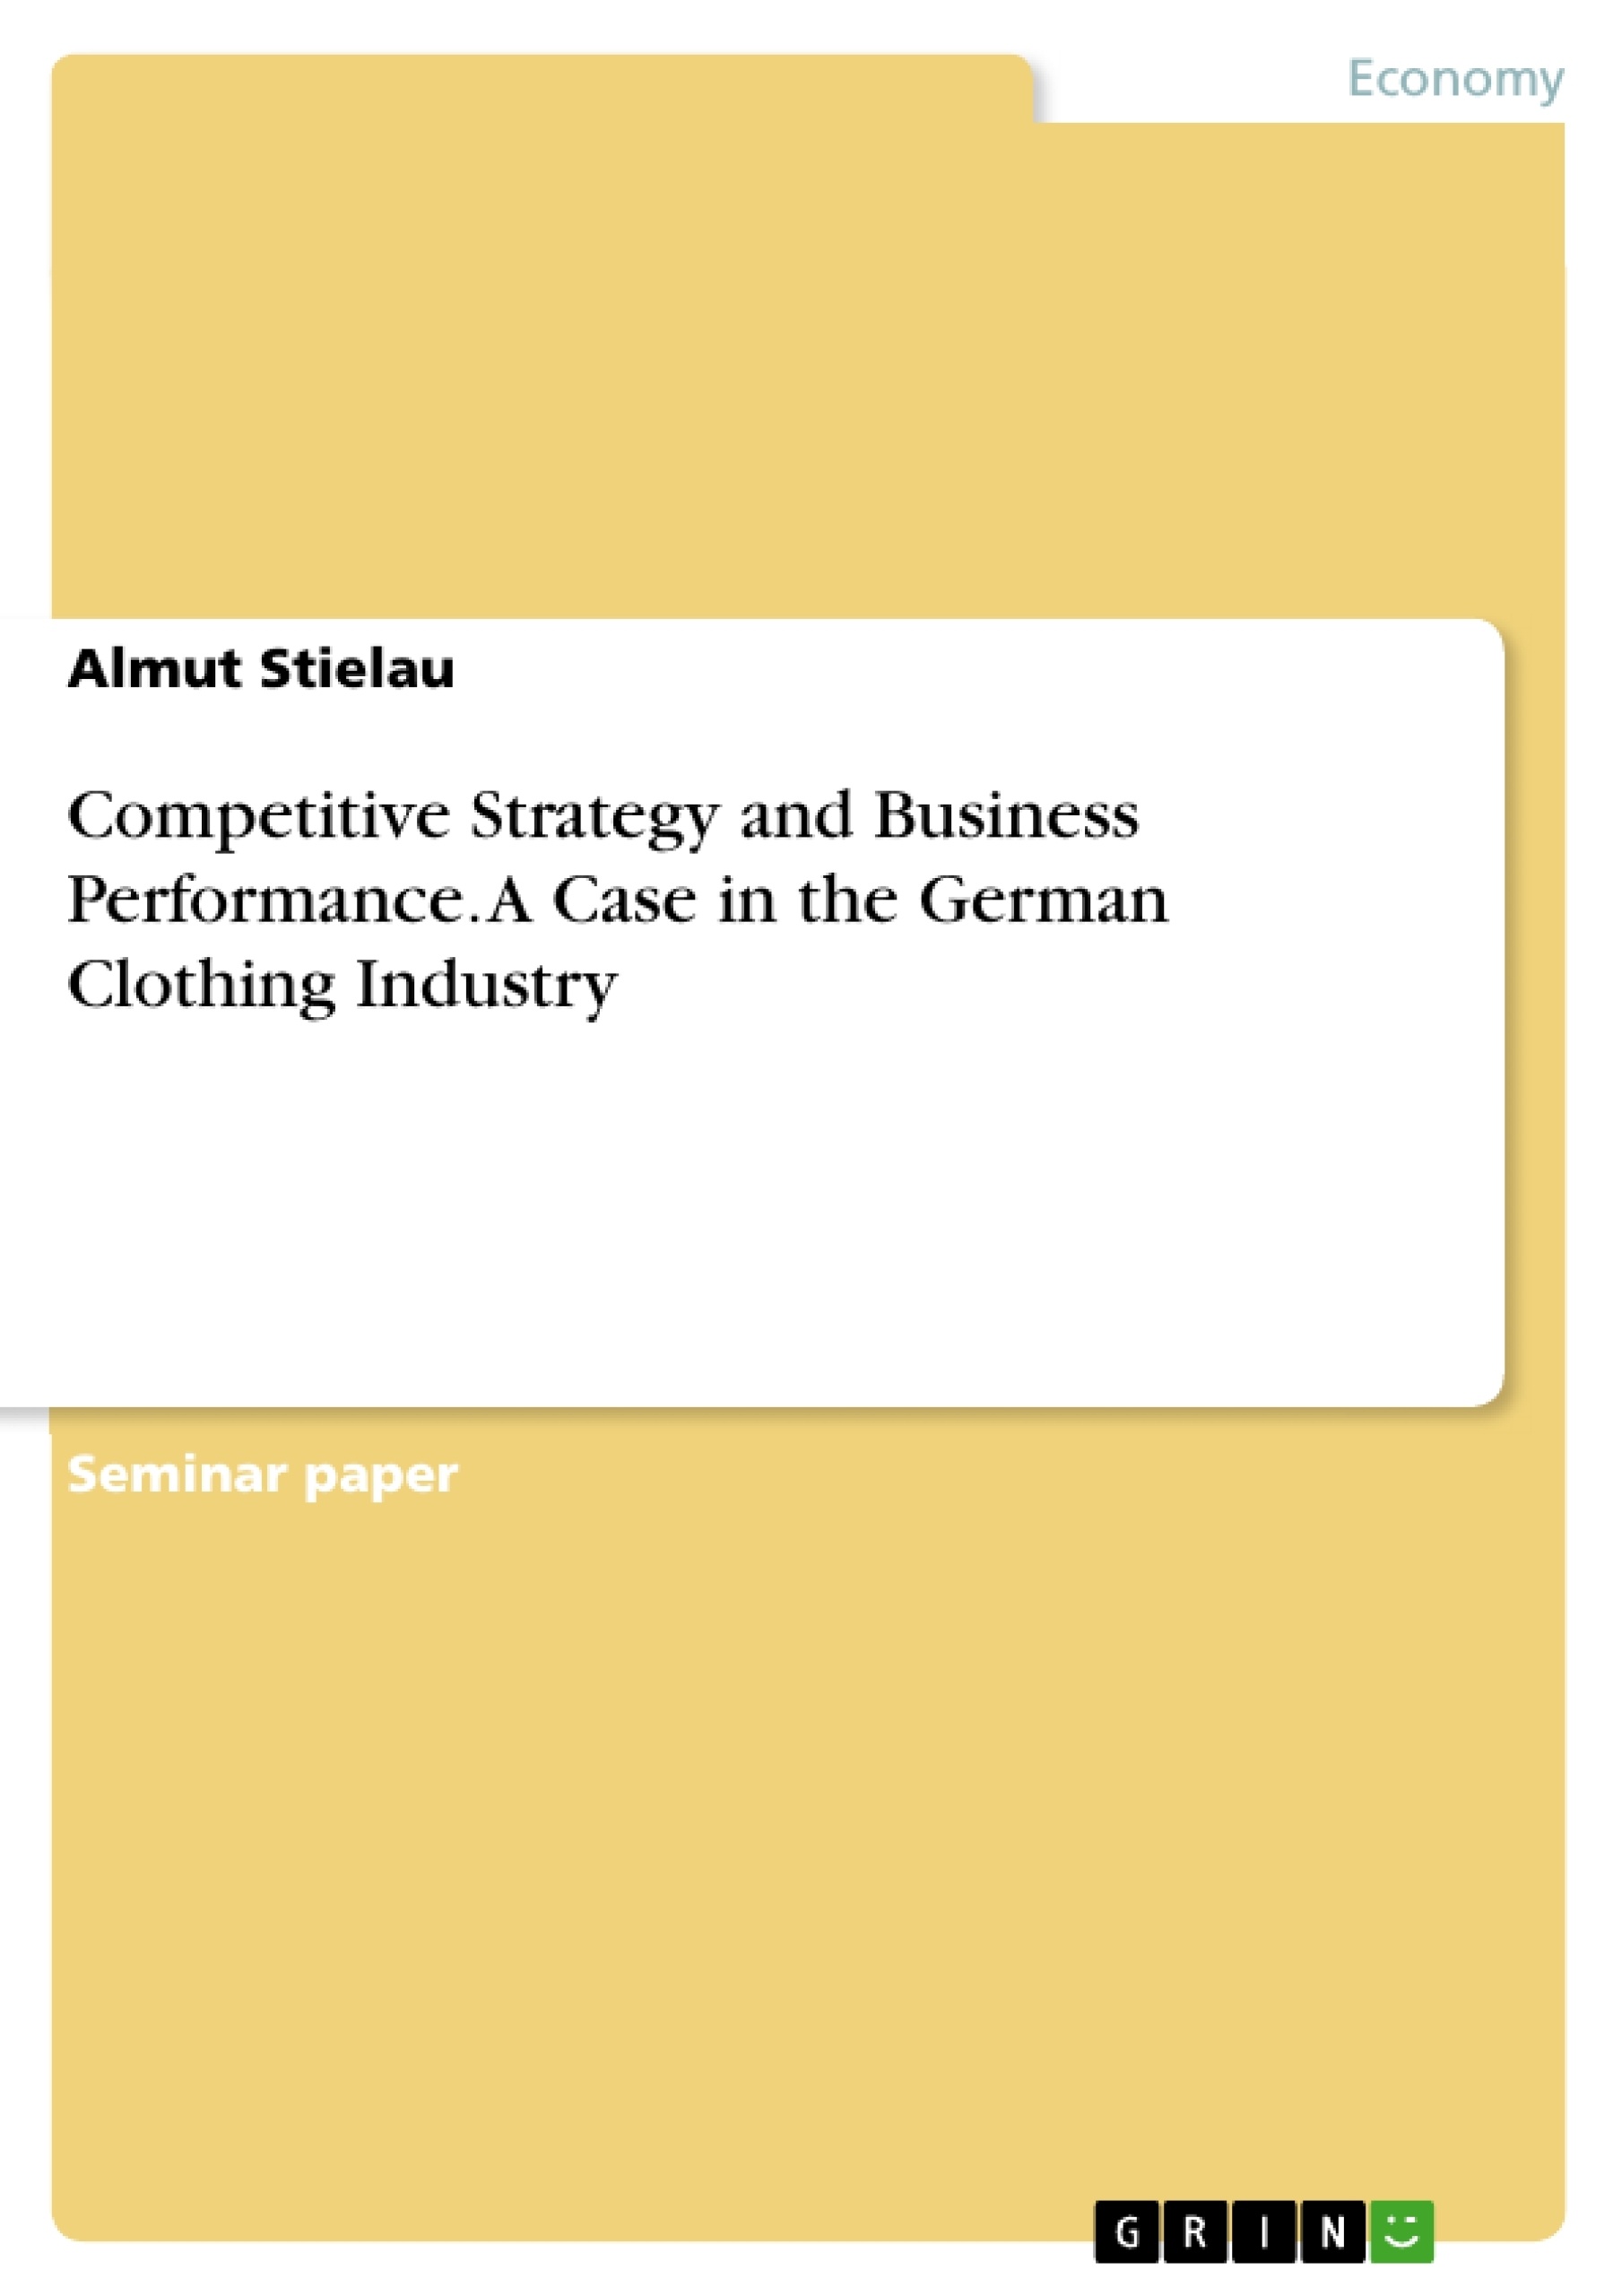 Title: Competitive Strategy and Business Performance. A Case in the German Clothing Industry